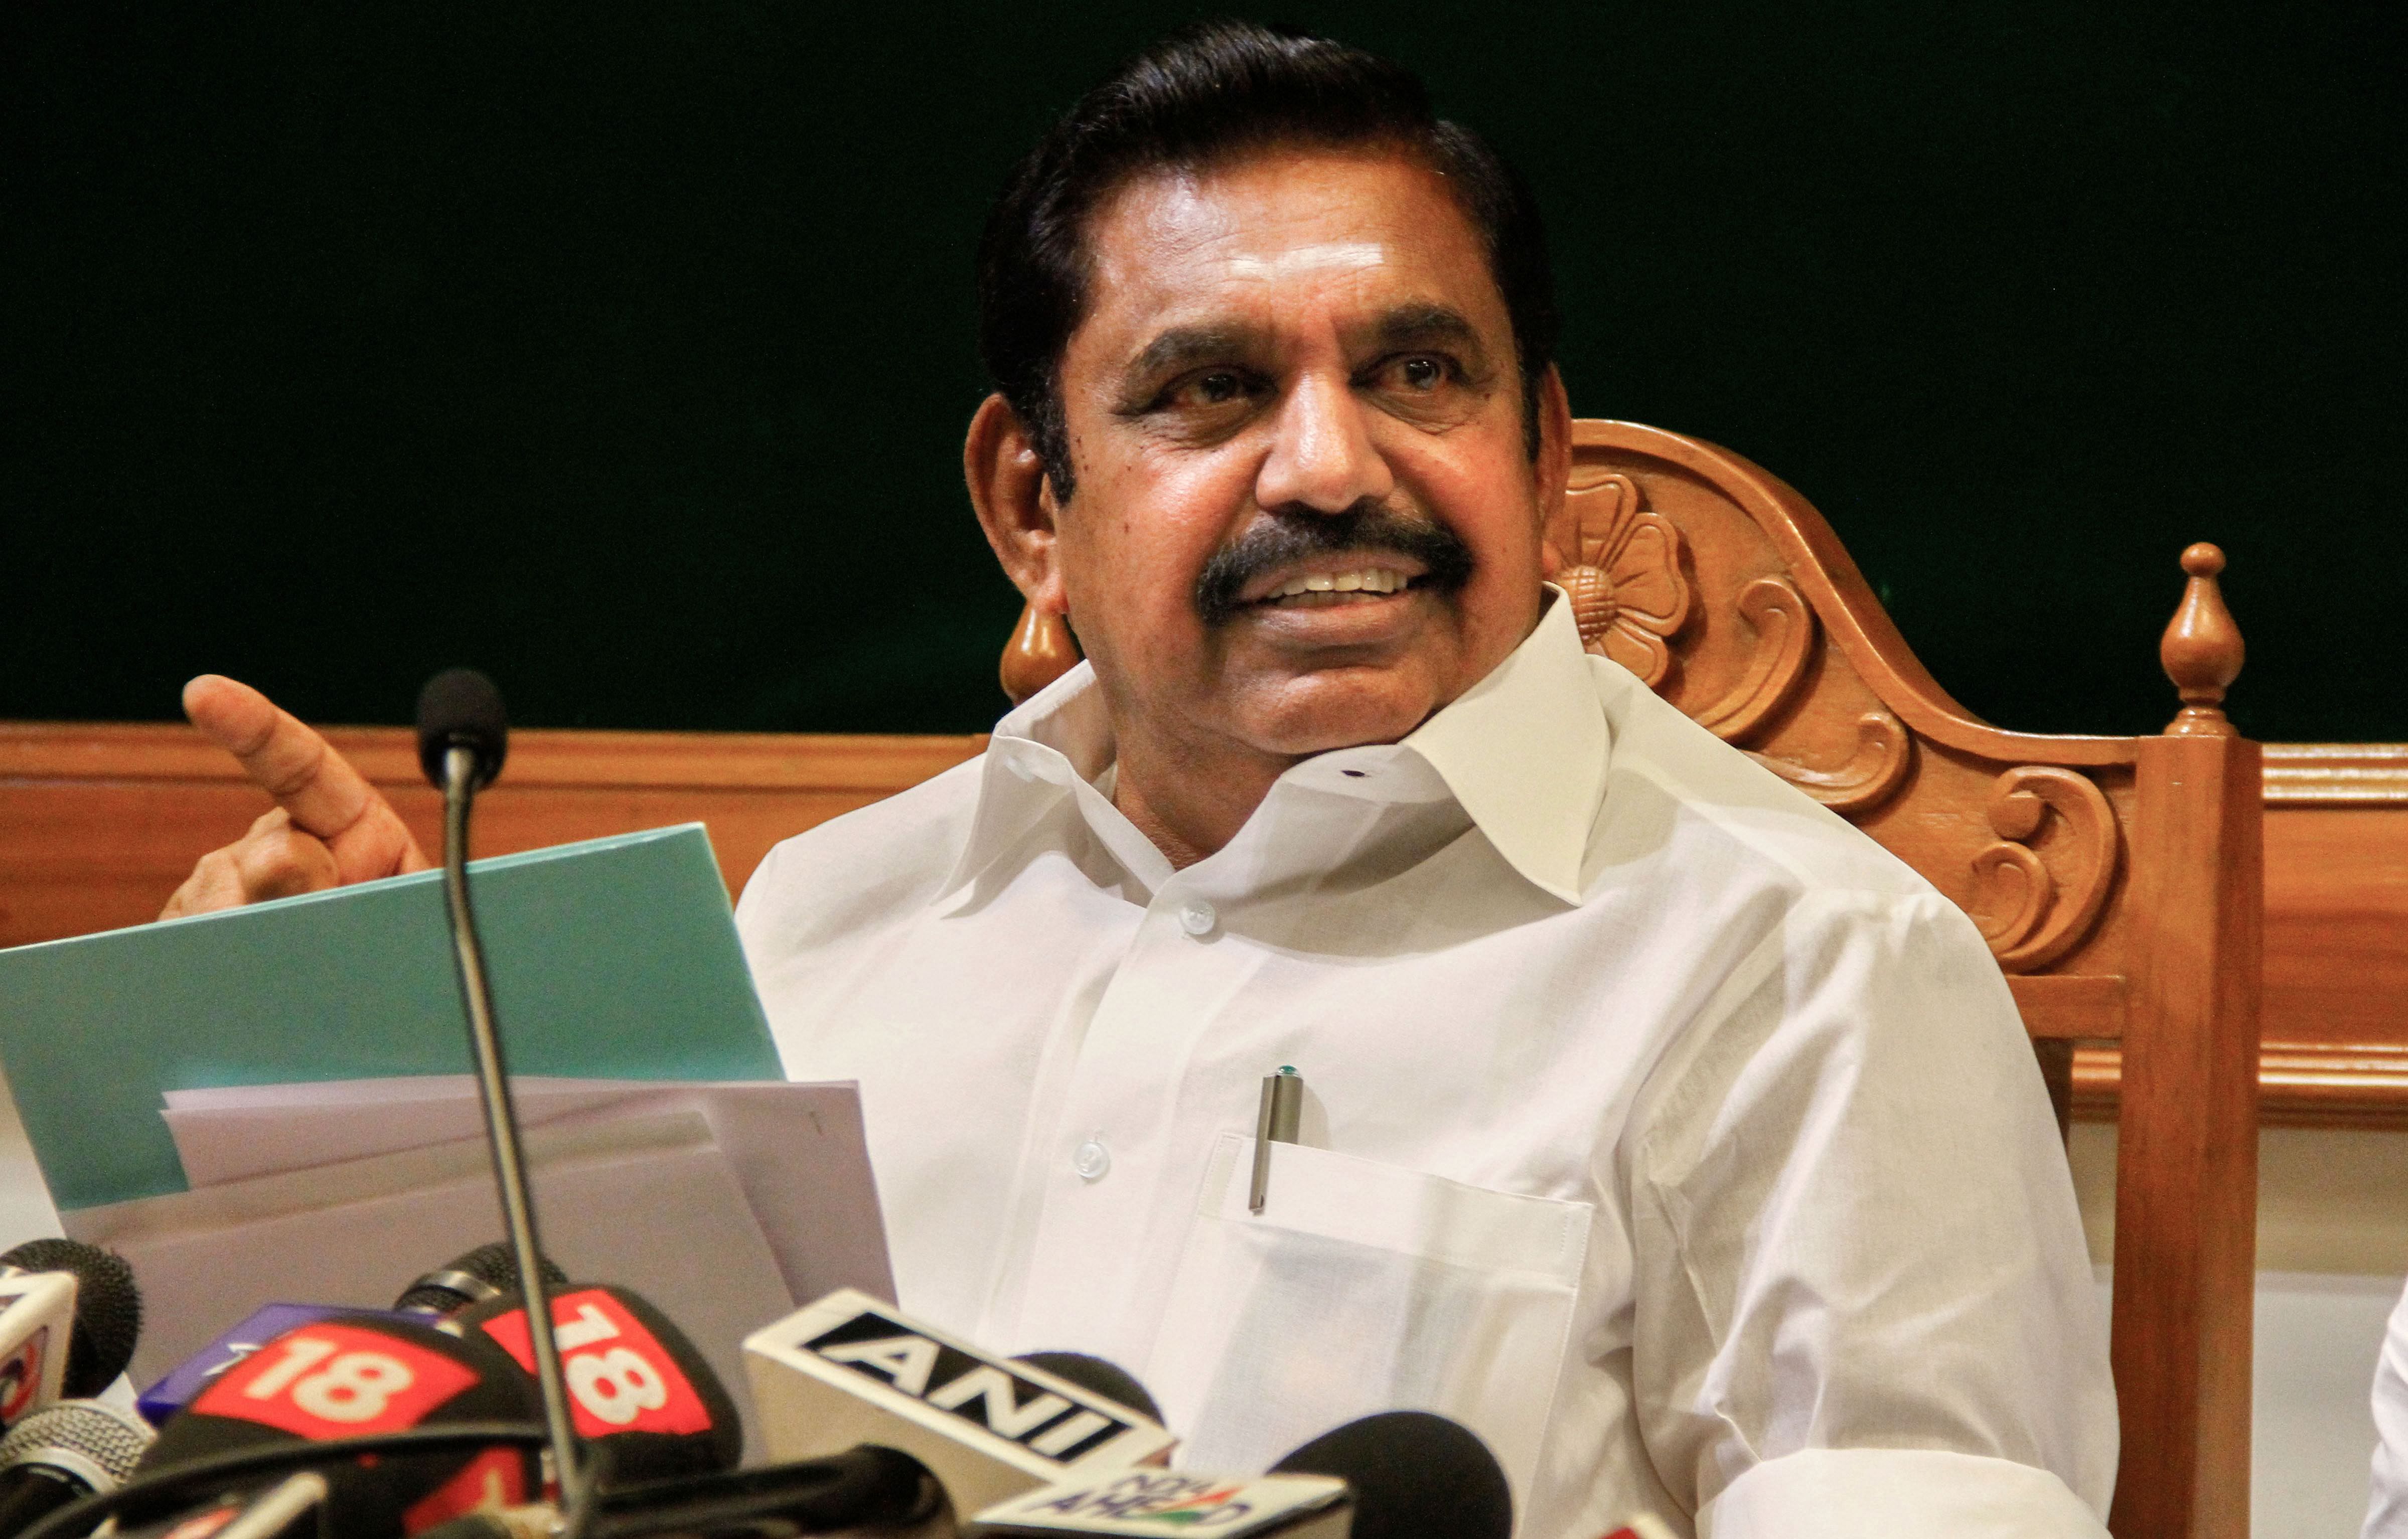 Tamil Nadu chief minister K Palaniswami made the suggestion, saying there were difficulties in contact tracing in case a person travelling outside a district without the e-pass tested positive for the deadly virus. Credit: PTI File Photo